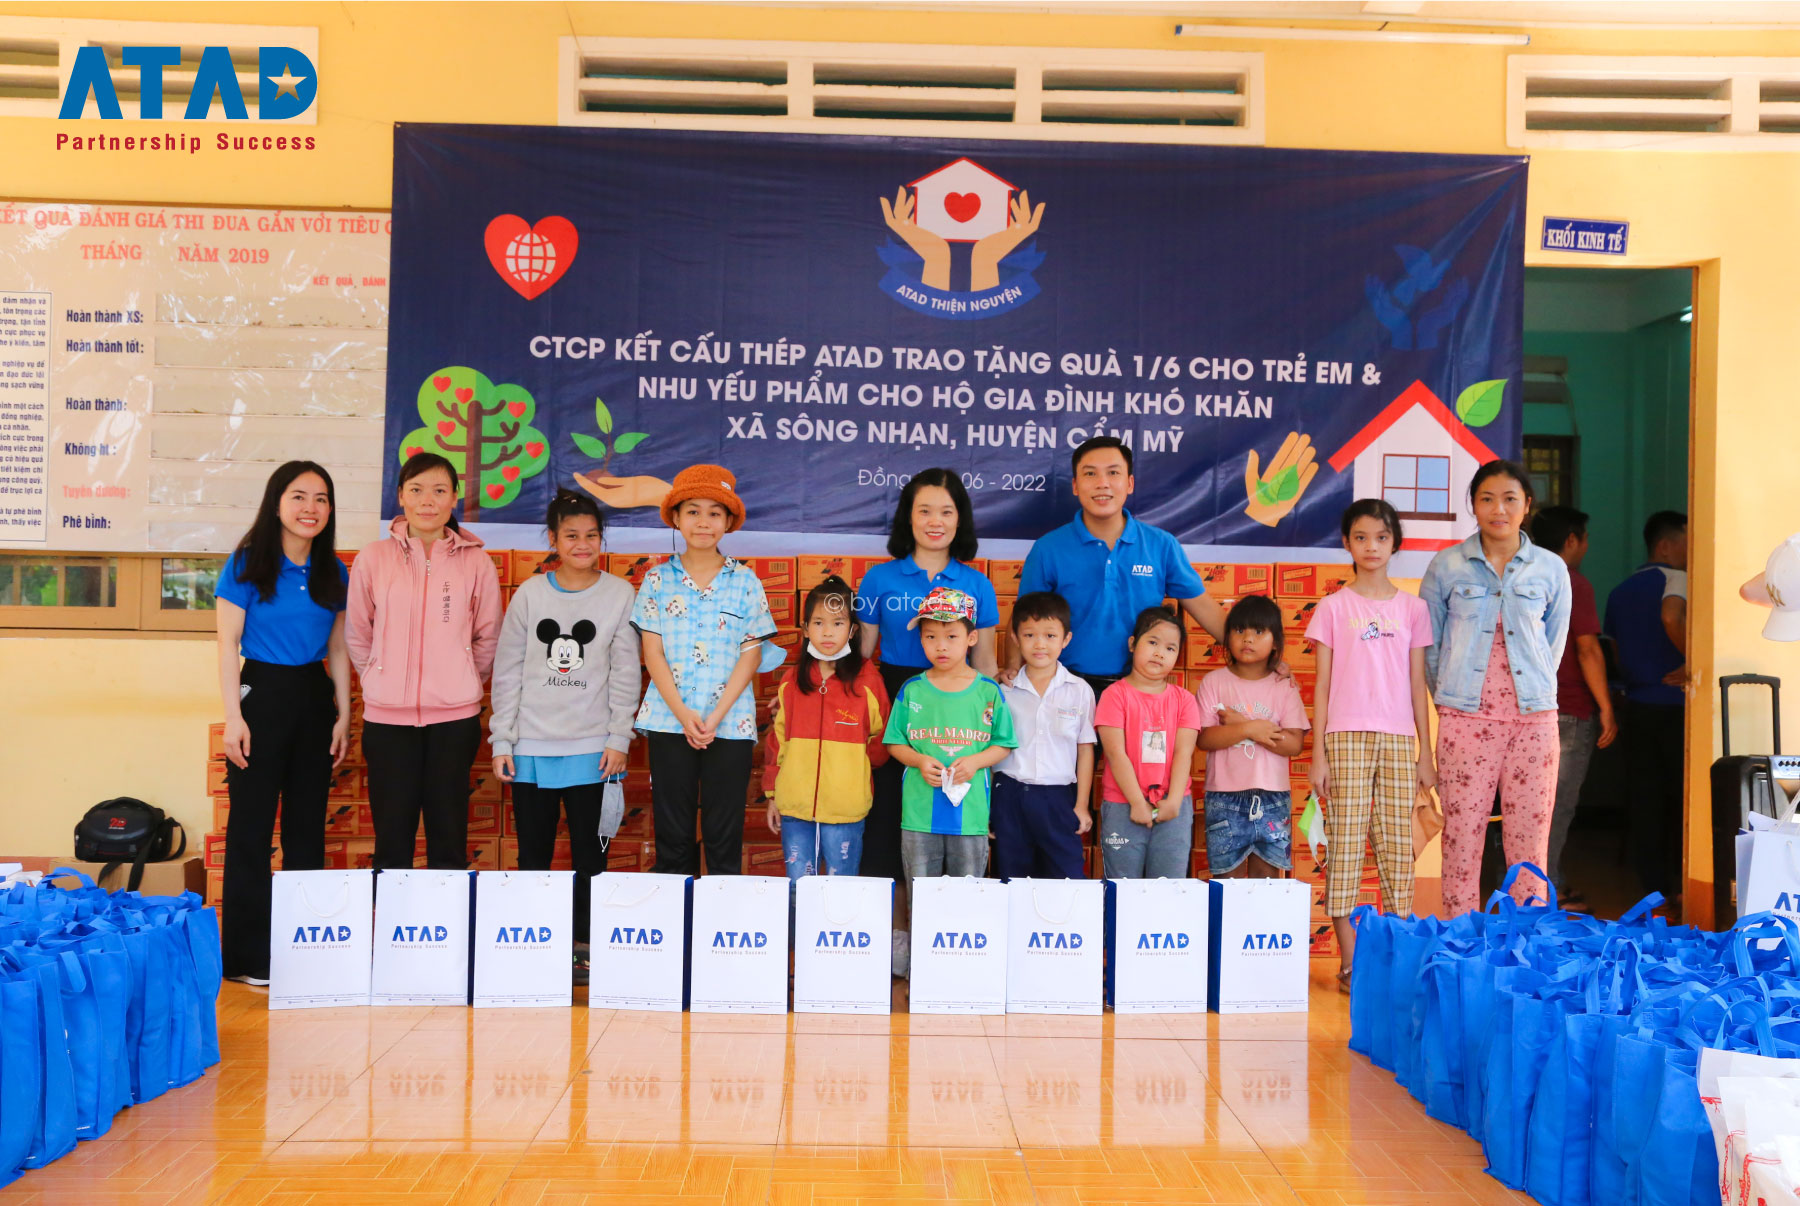 ATAD Presented Gifts For Children On International Children’s Day 1/6 & Necessities For Underprivileged Households Living In Song Nhan Village, Dong Nai Province 1